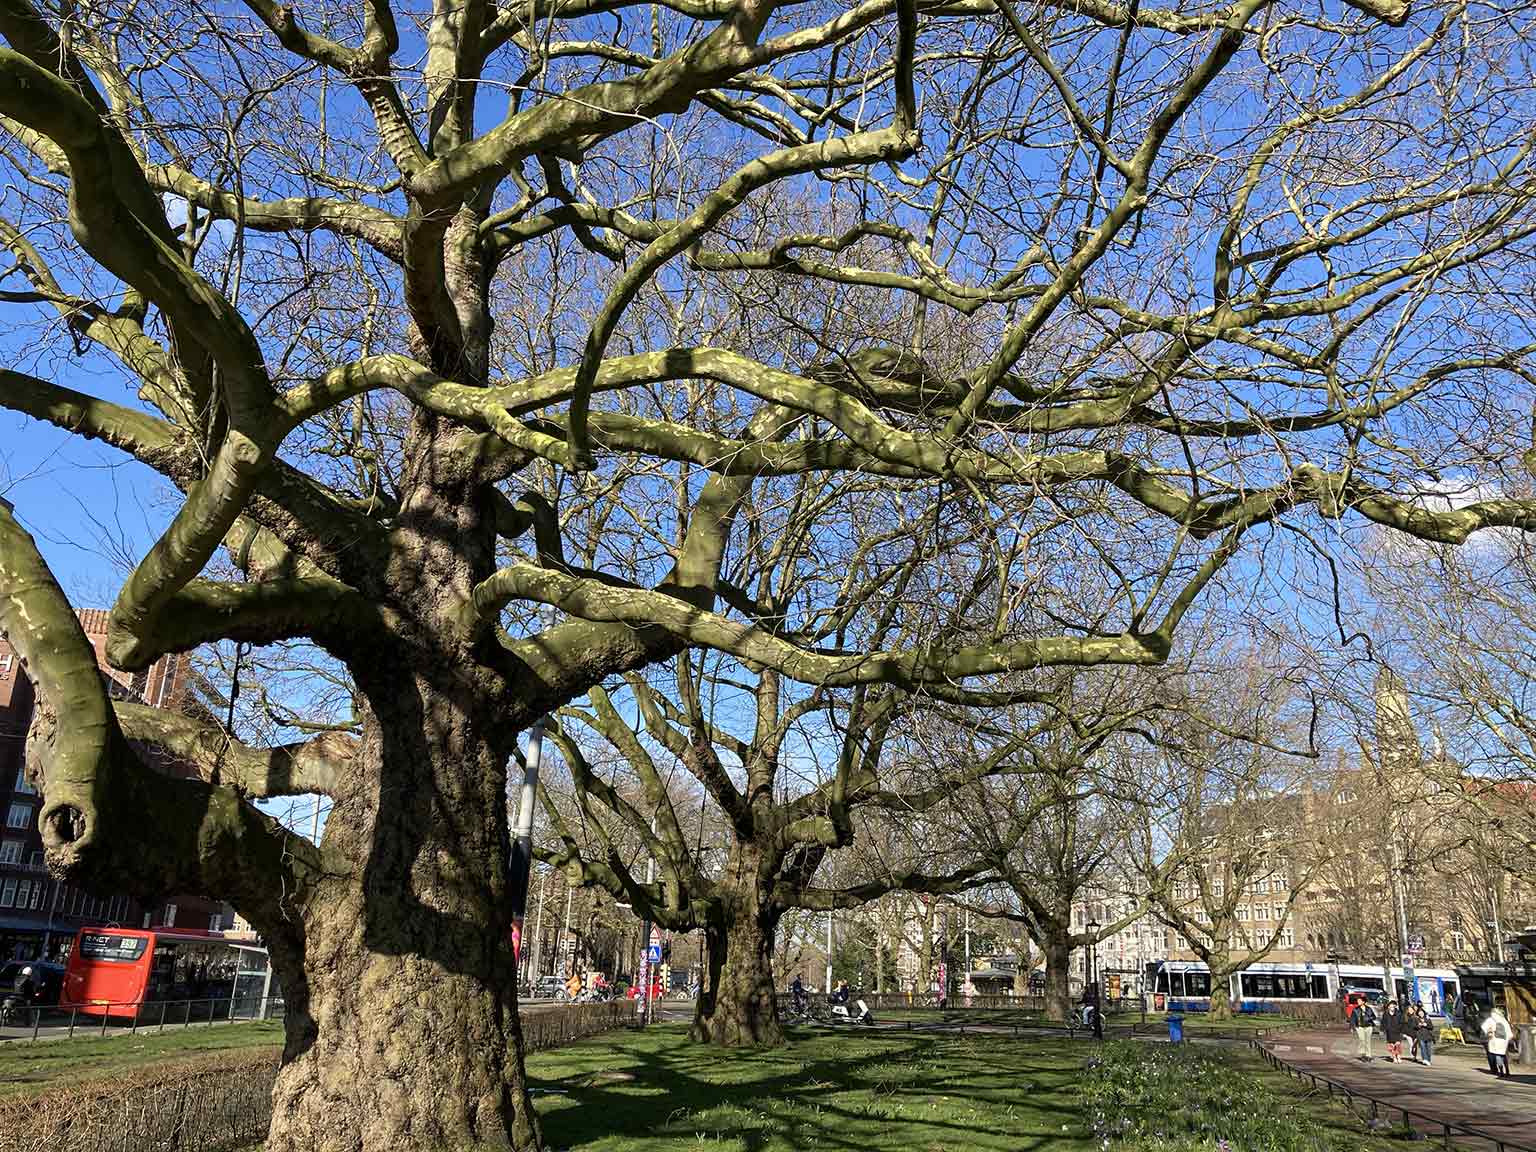 Southern part of Leidsebosje, Amsterdam, with plane trees from 1865